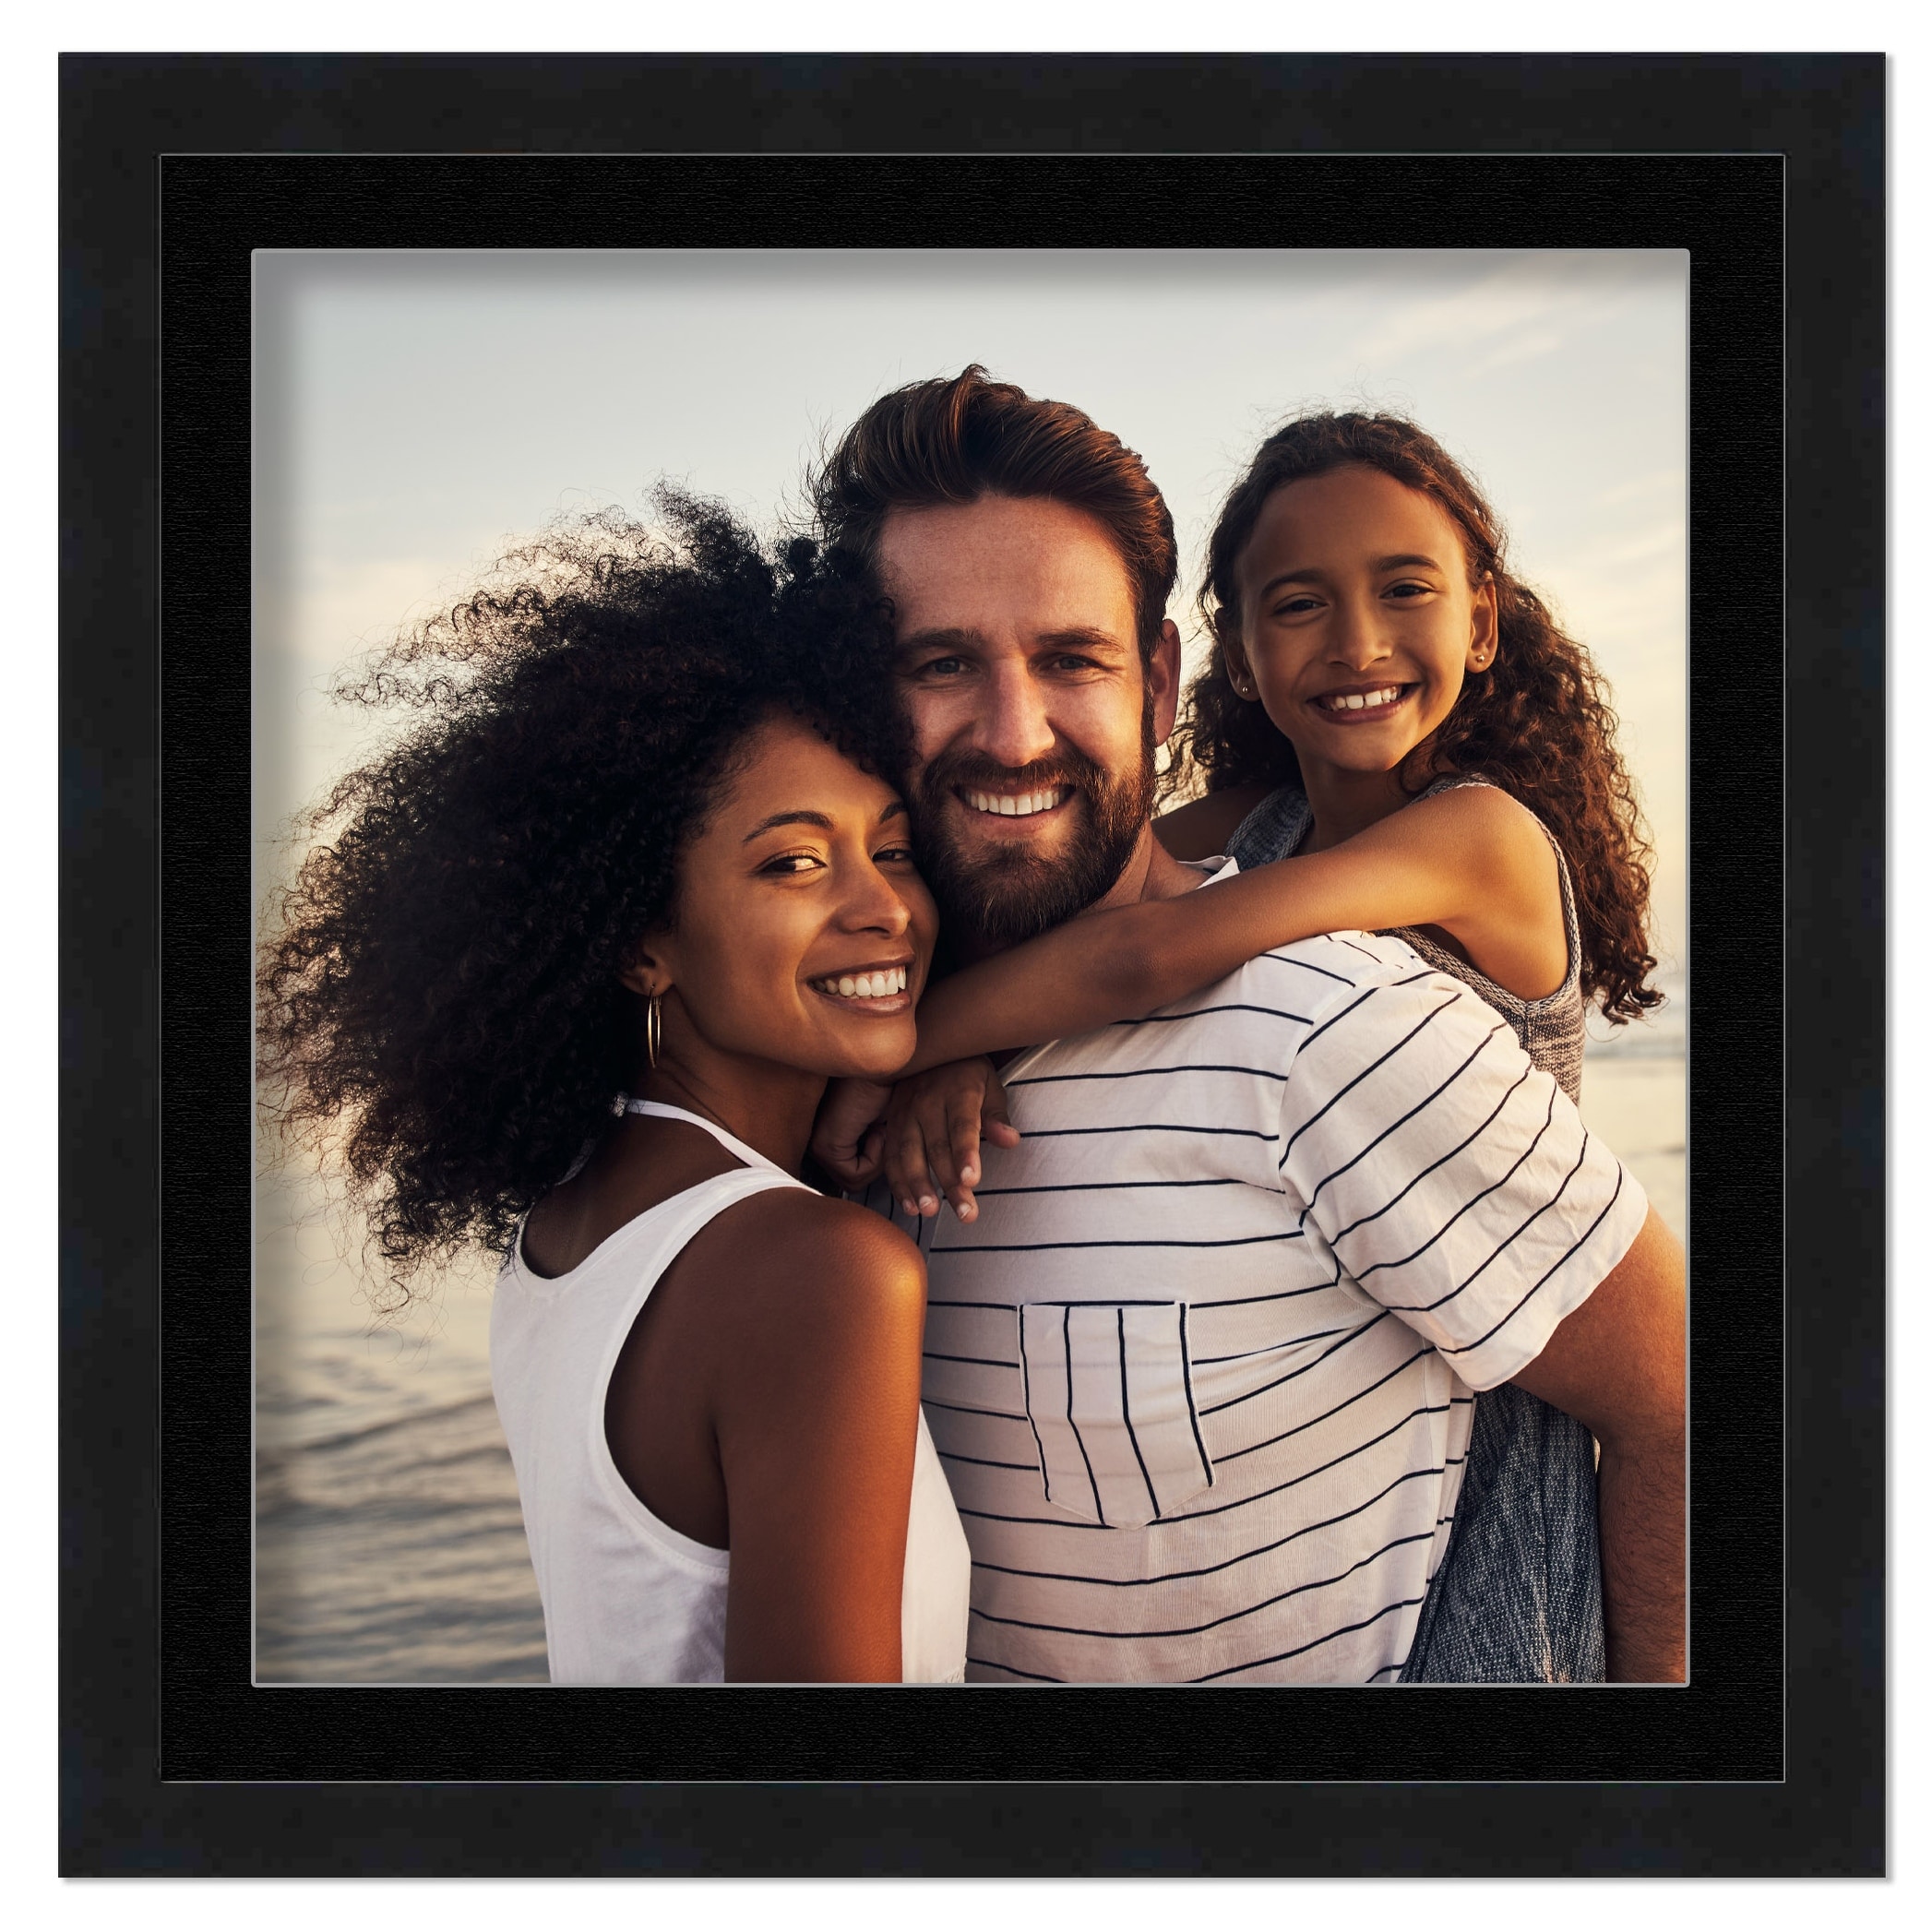 9x9 Frame with Mat - Black 12x12 Frame Wood Made to Display Print or Poster Measuring 9 x 9 Inches with Black Photo Mat